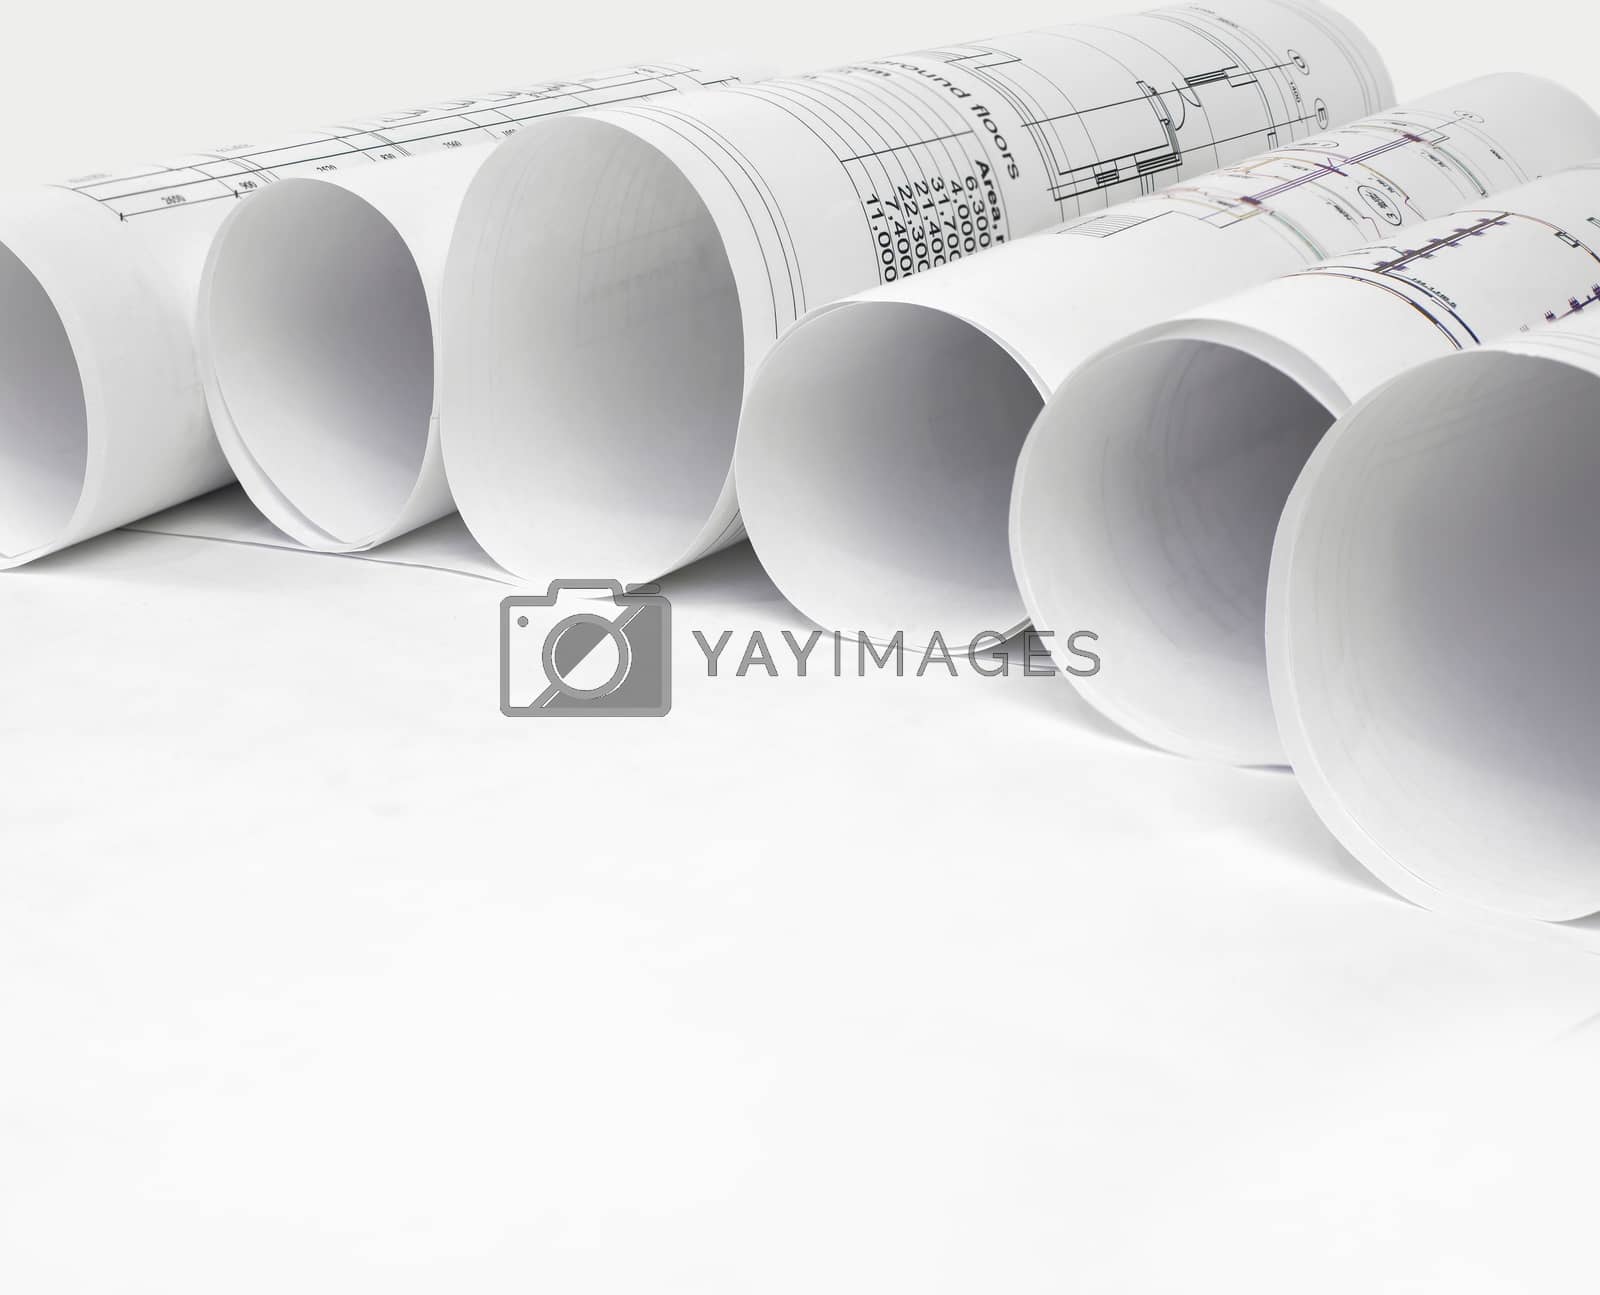 Royalty free image of Scrolls of architectural drawings by cherezoff